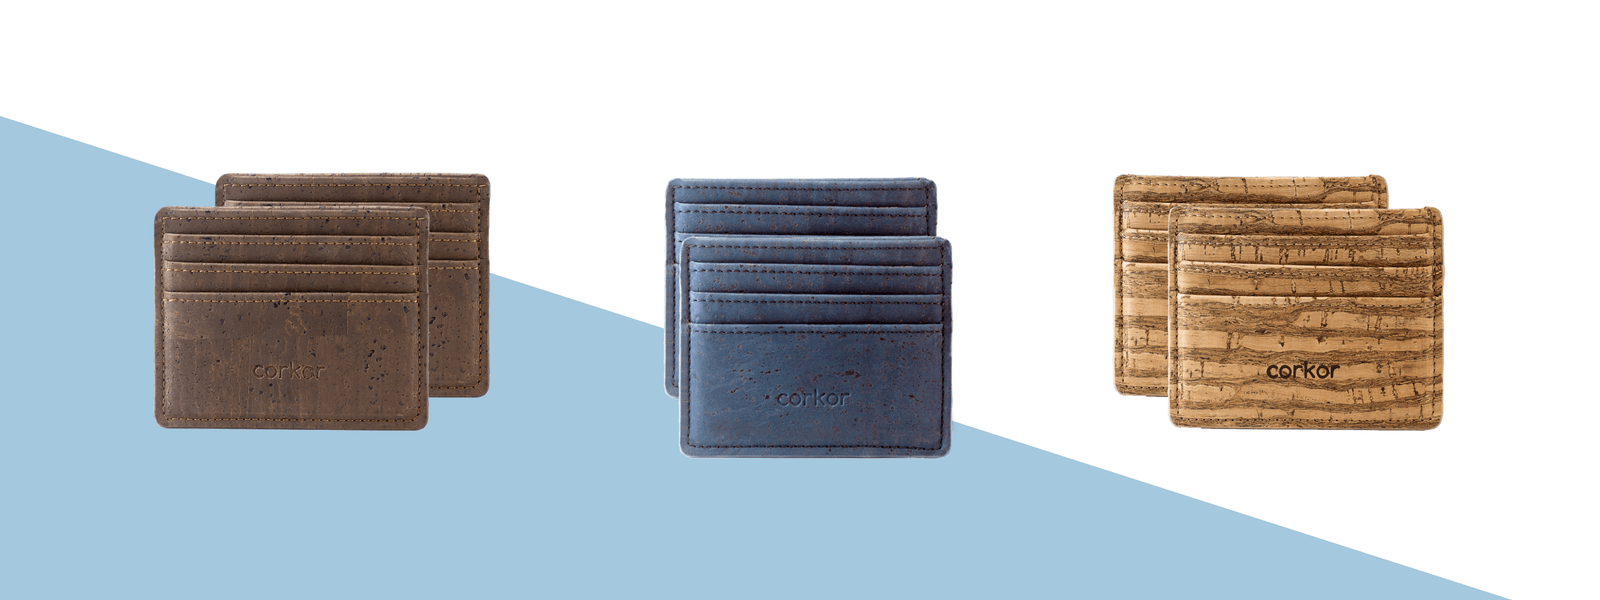 Card Holders: The Stylish Way to Store Cards and Cash | Corkor